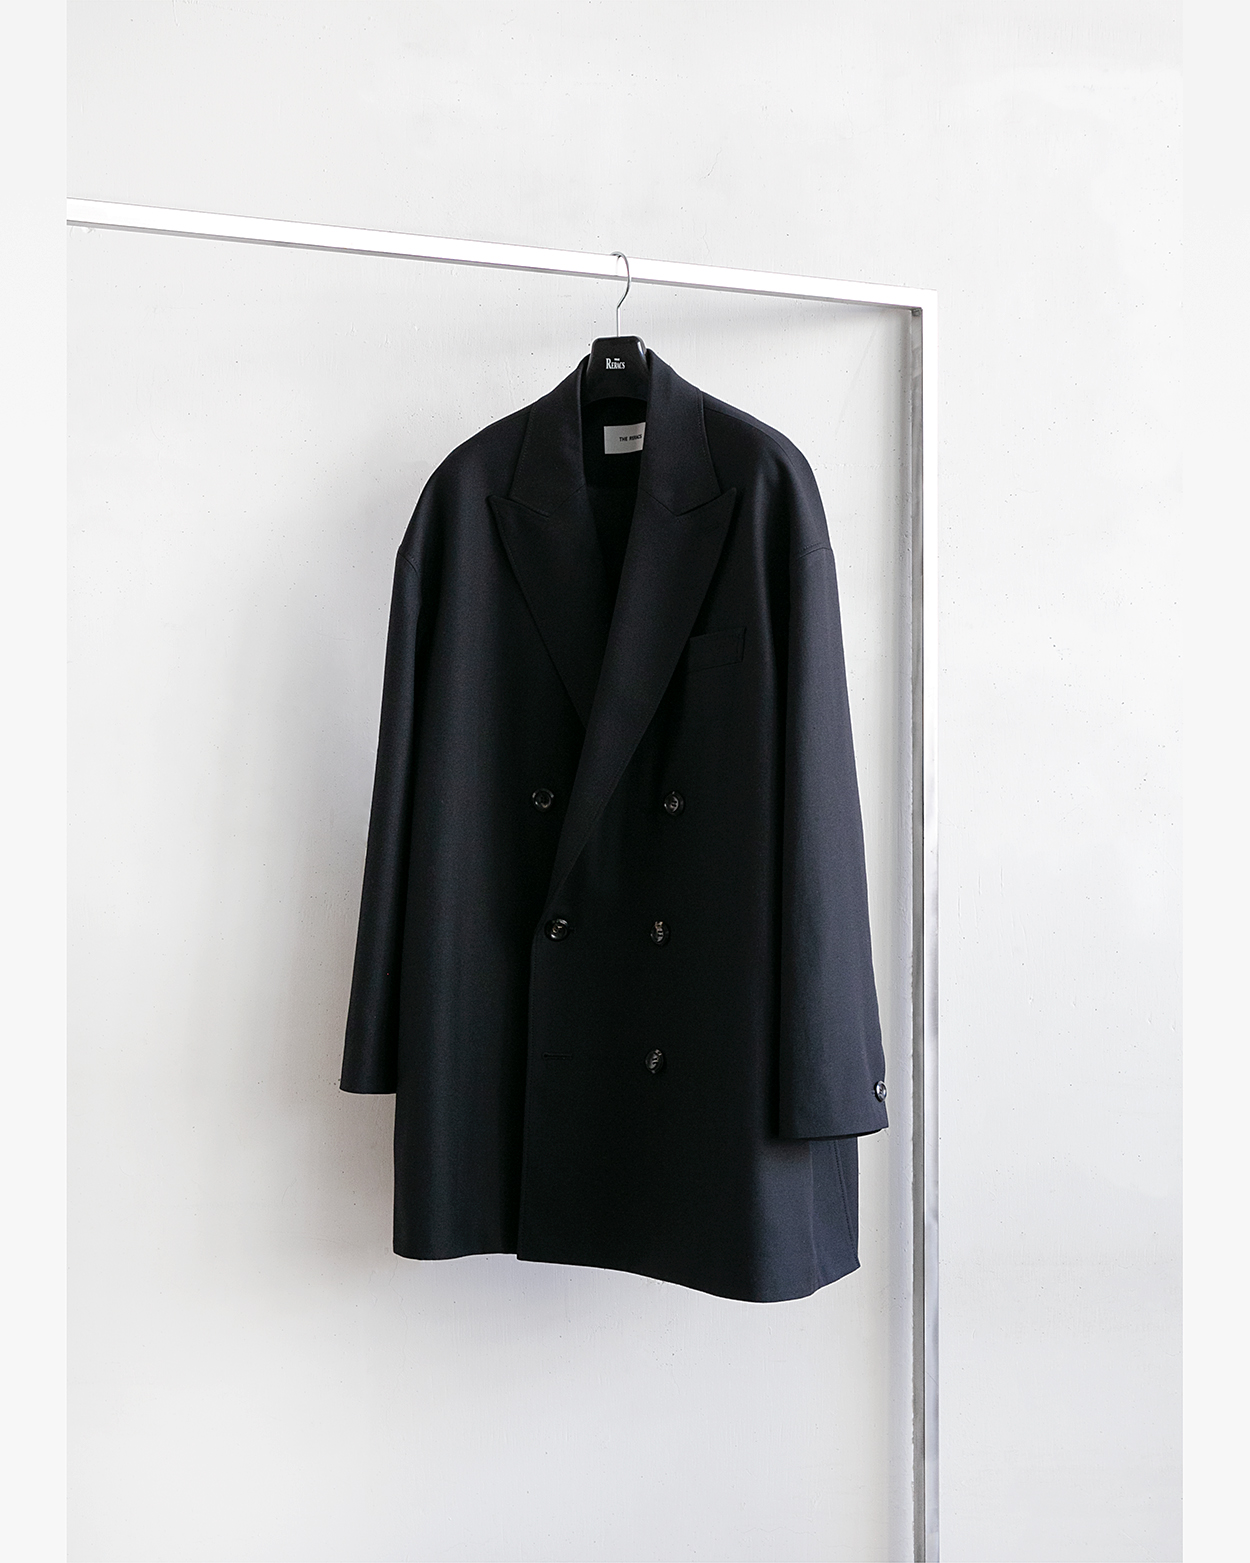 Tronica » THE RERACS _ DROP.S DOUBLE PEAKED LAPEL JACKET